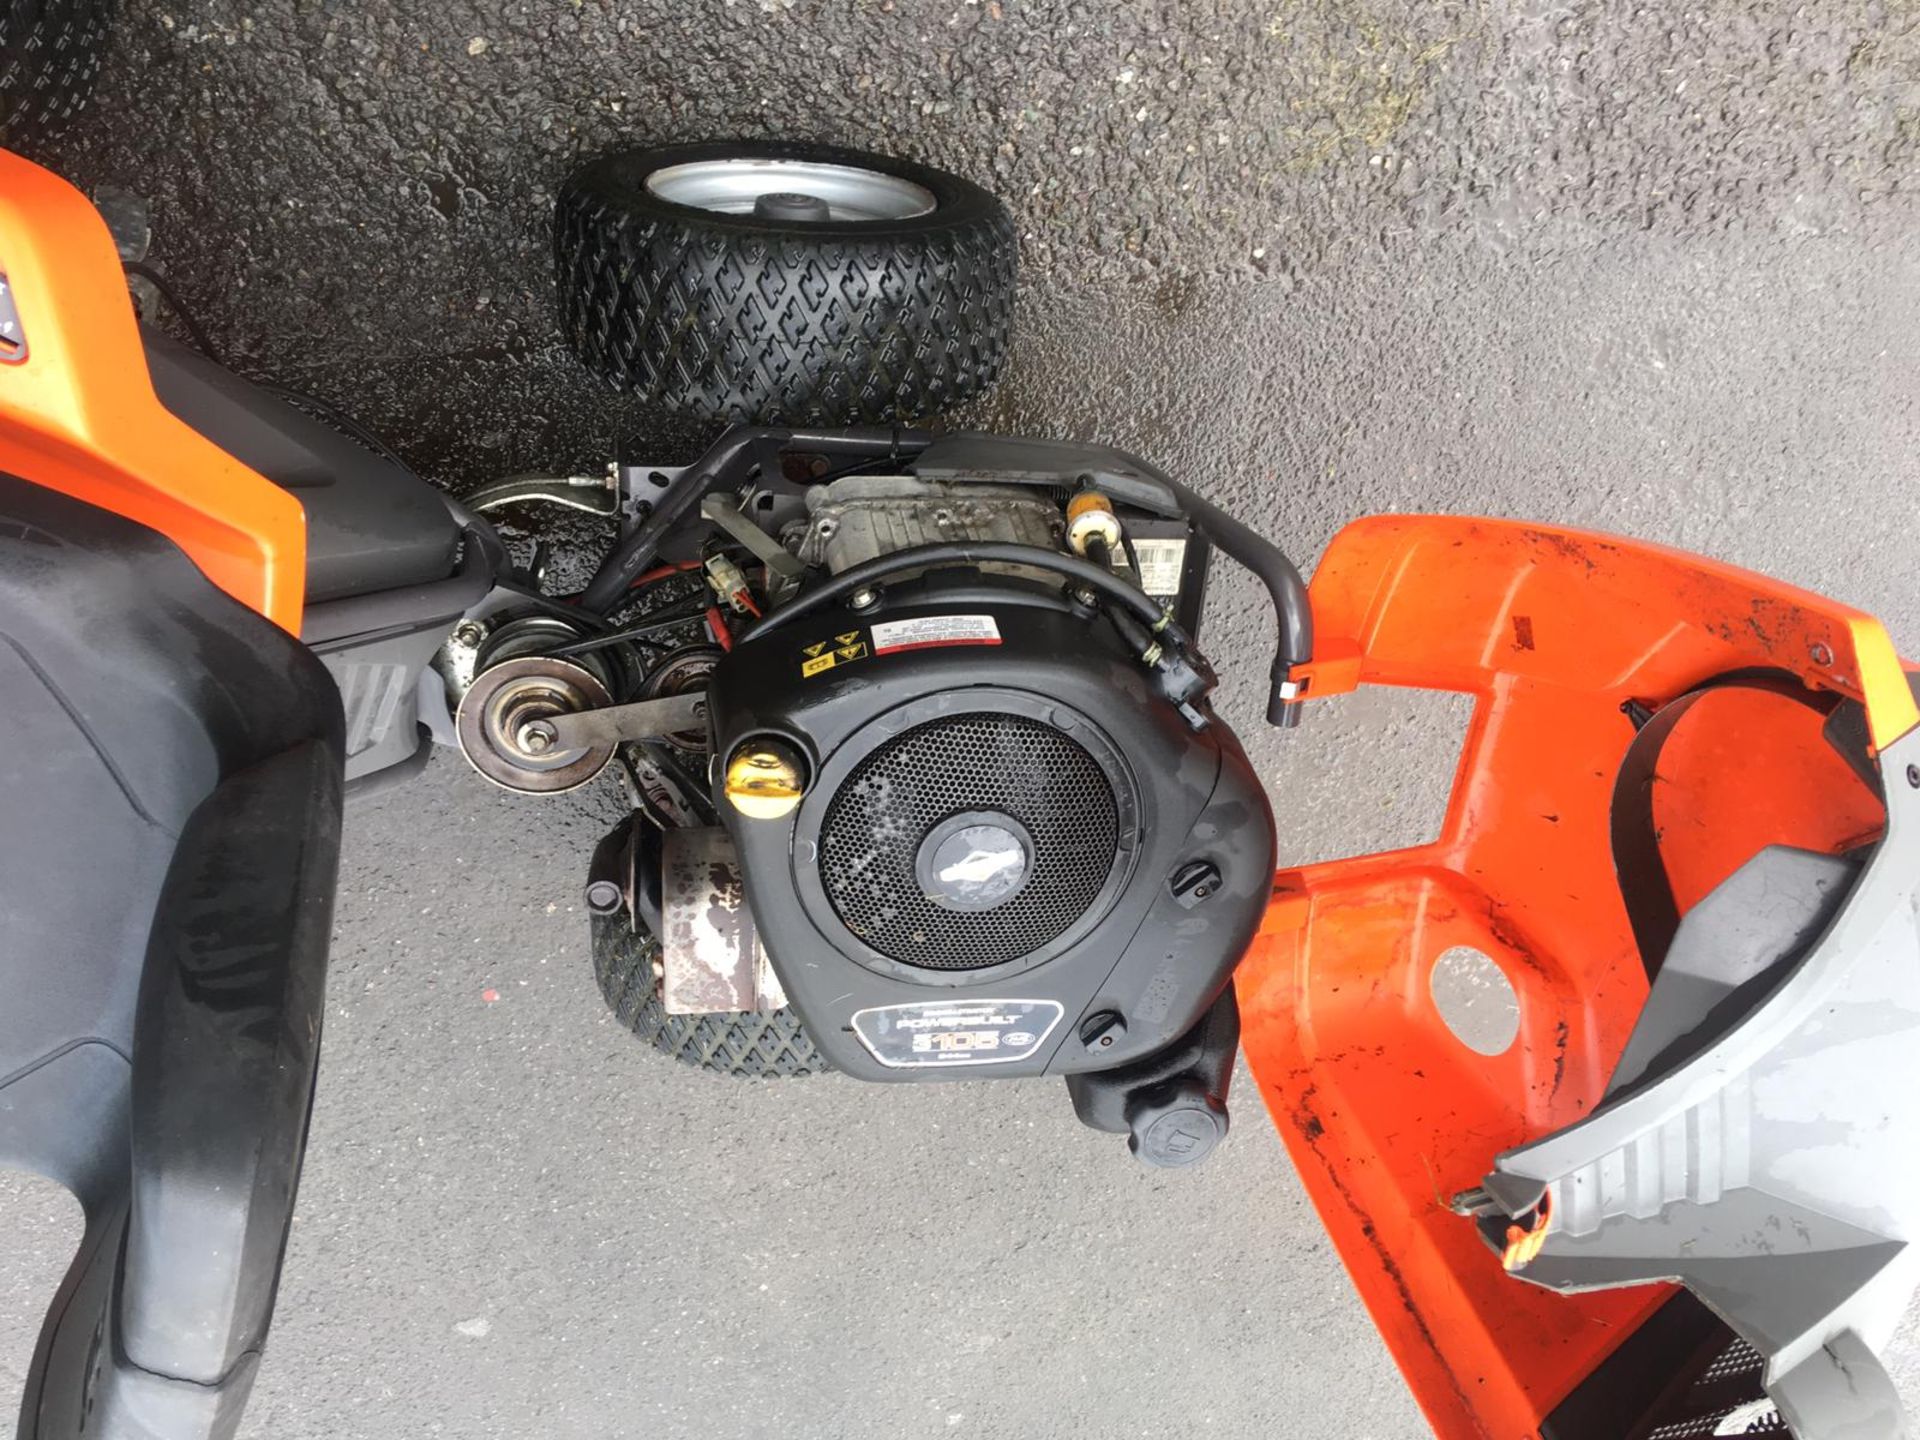 HUSQVARNA R111B5 ARTICULATED RIDE ON LAWN MOWER, YEAR 2010, WEIGHT 165 KG *NO VAT* - Image 7 of 10